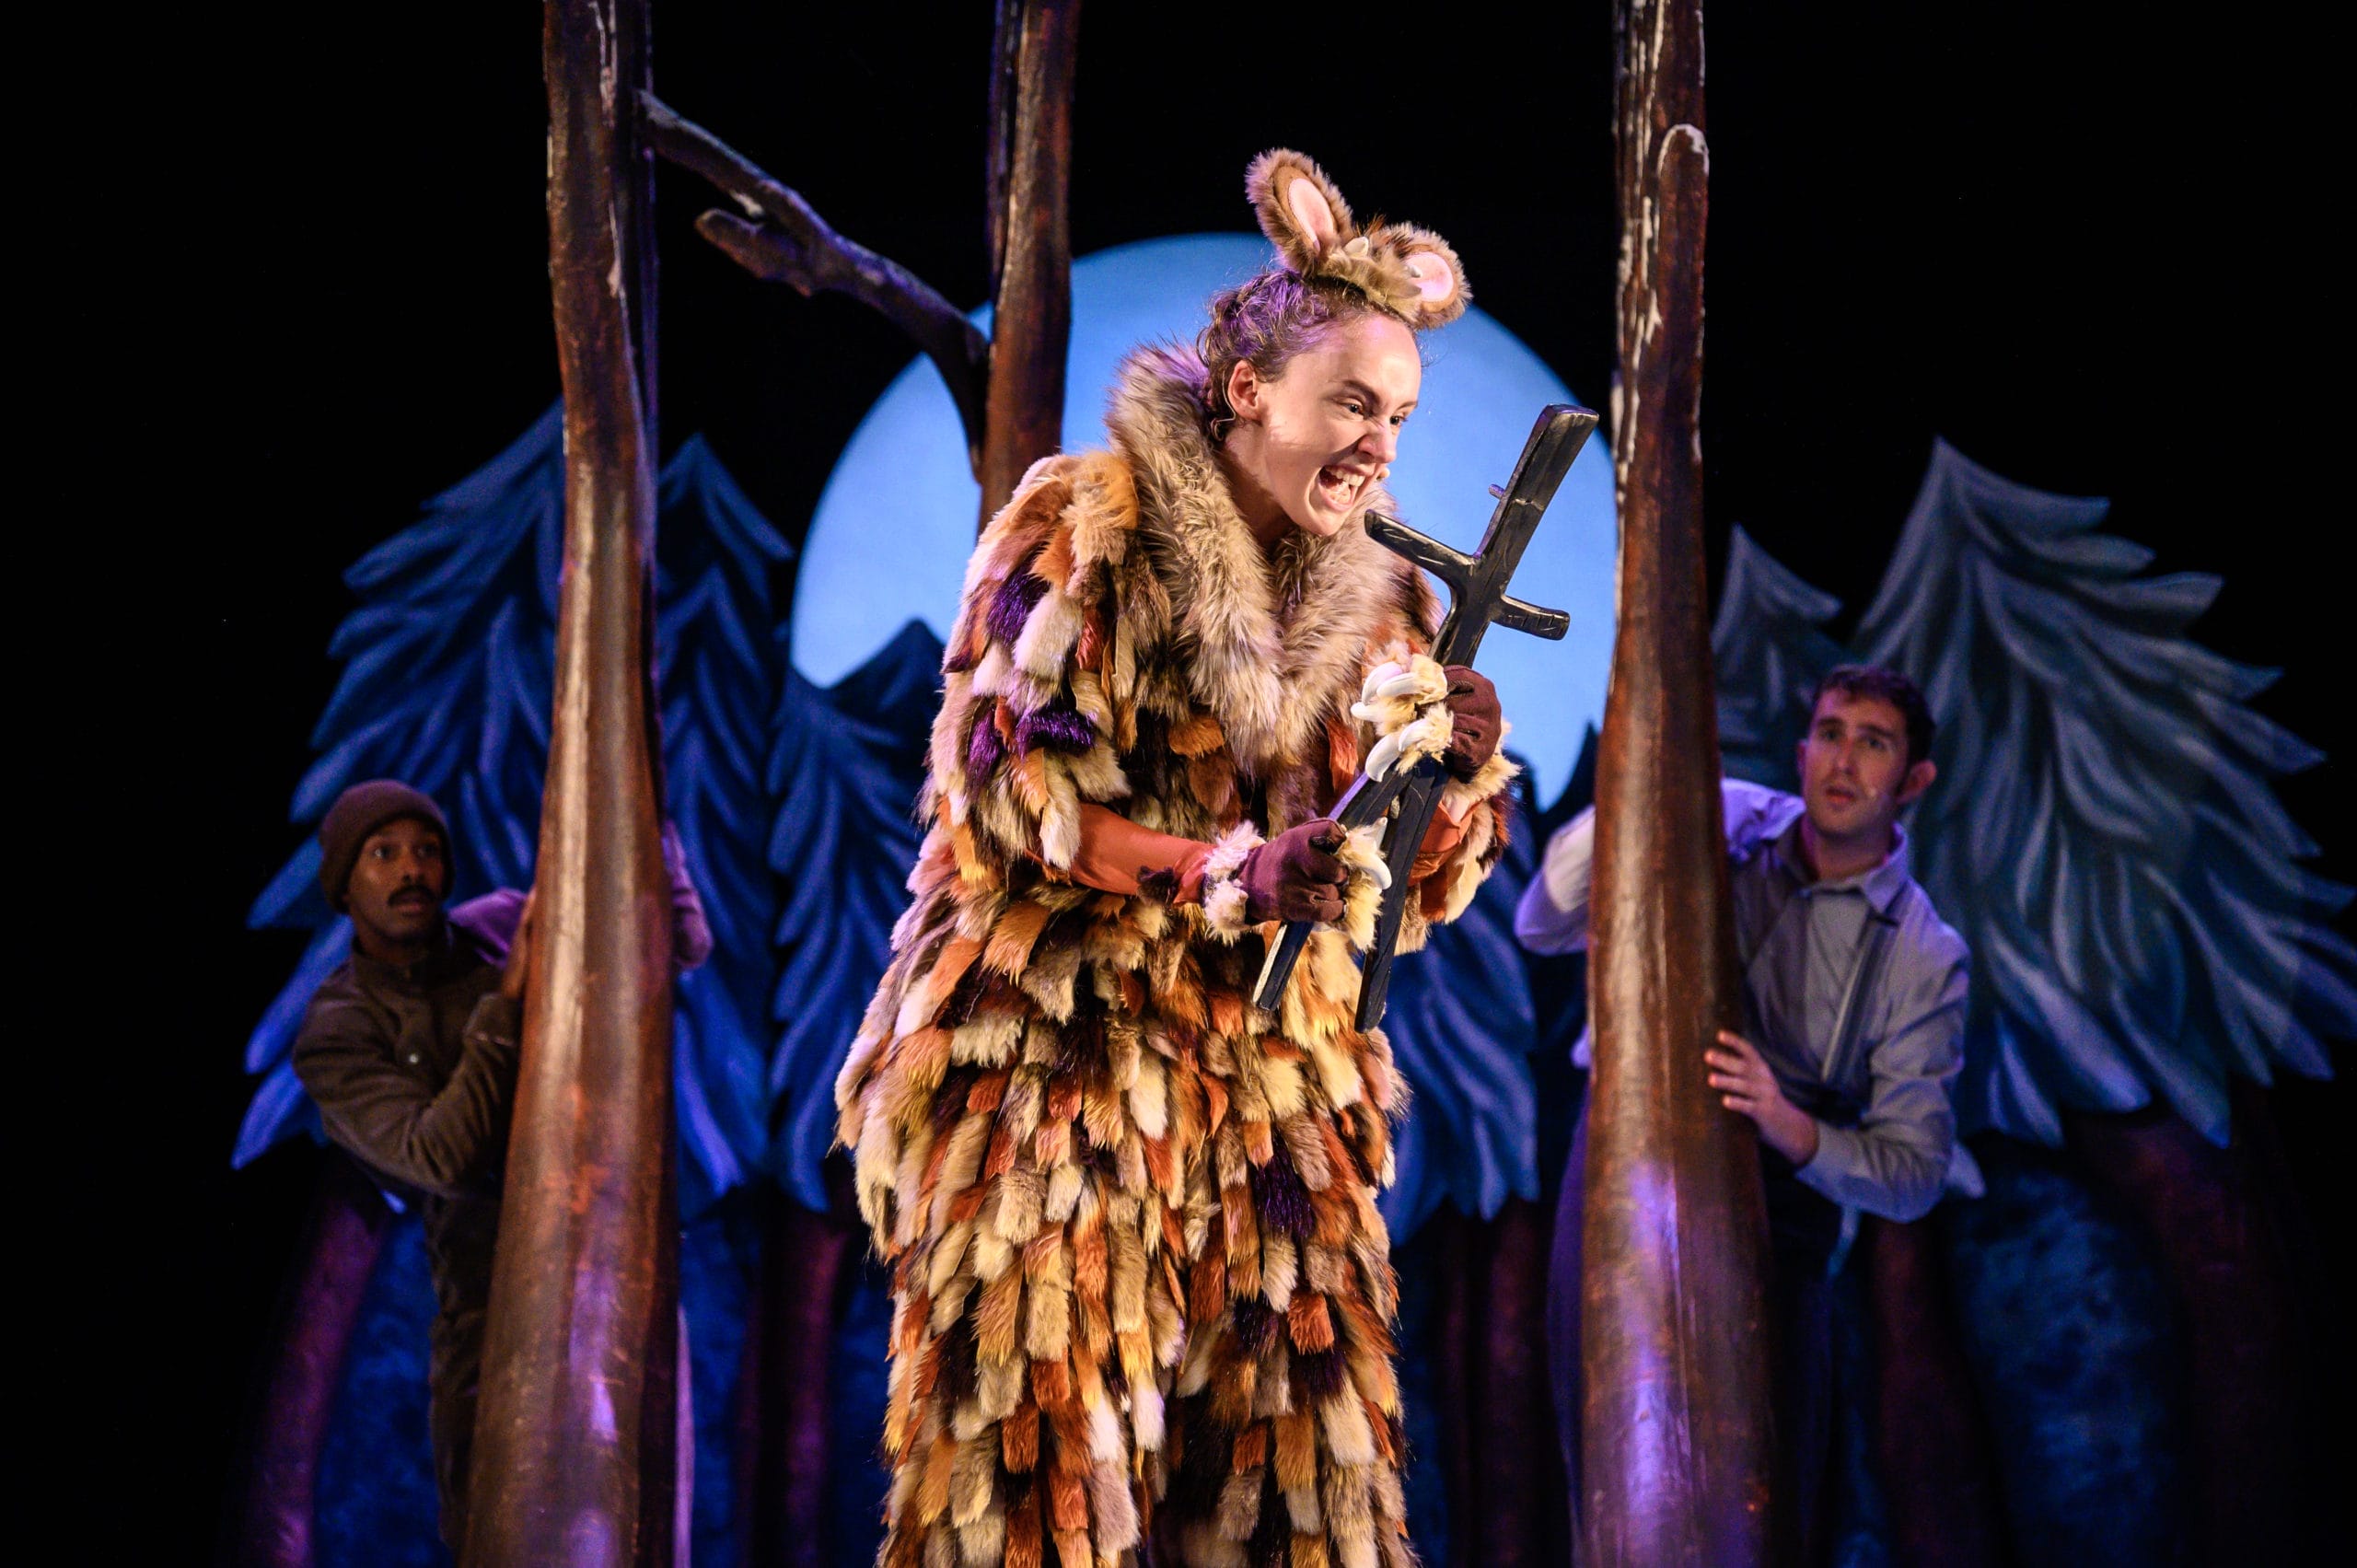 Production shot from The Gruffalo's Child artsdepot! Actor wears a large fluffy gruffalo costume with cute furry areas. She is holding her hazel stick and glaring at it with an exaggerated expression.